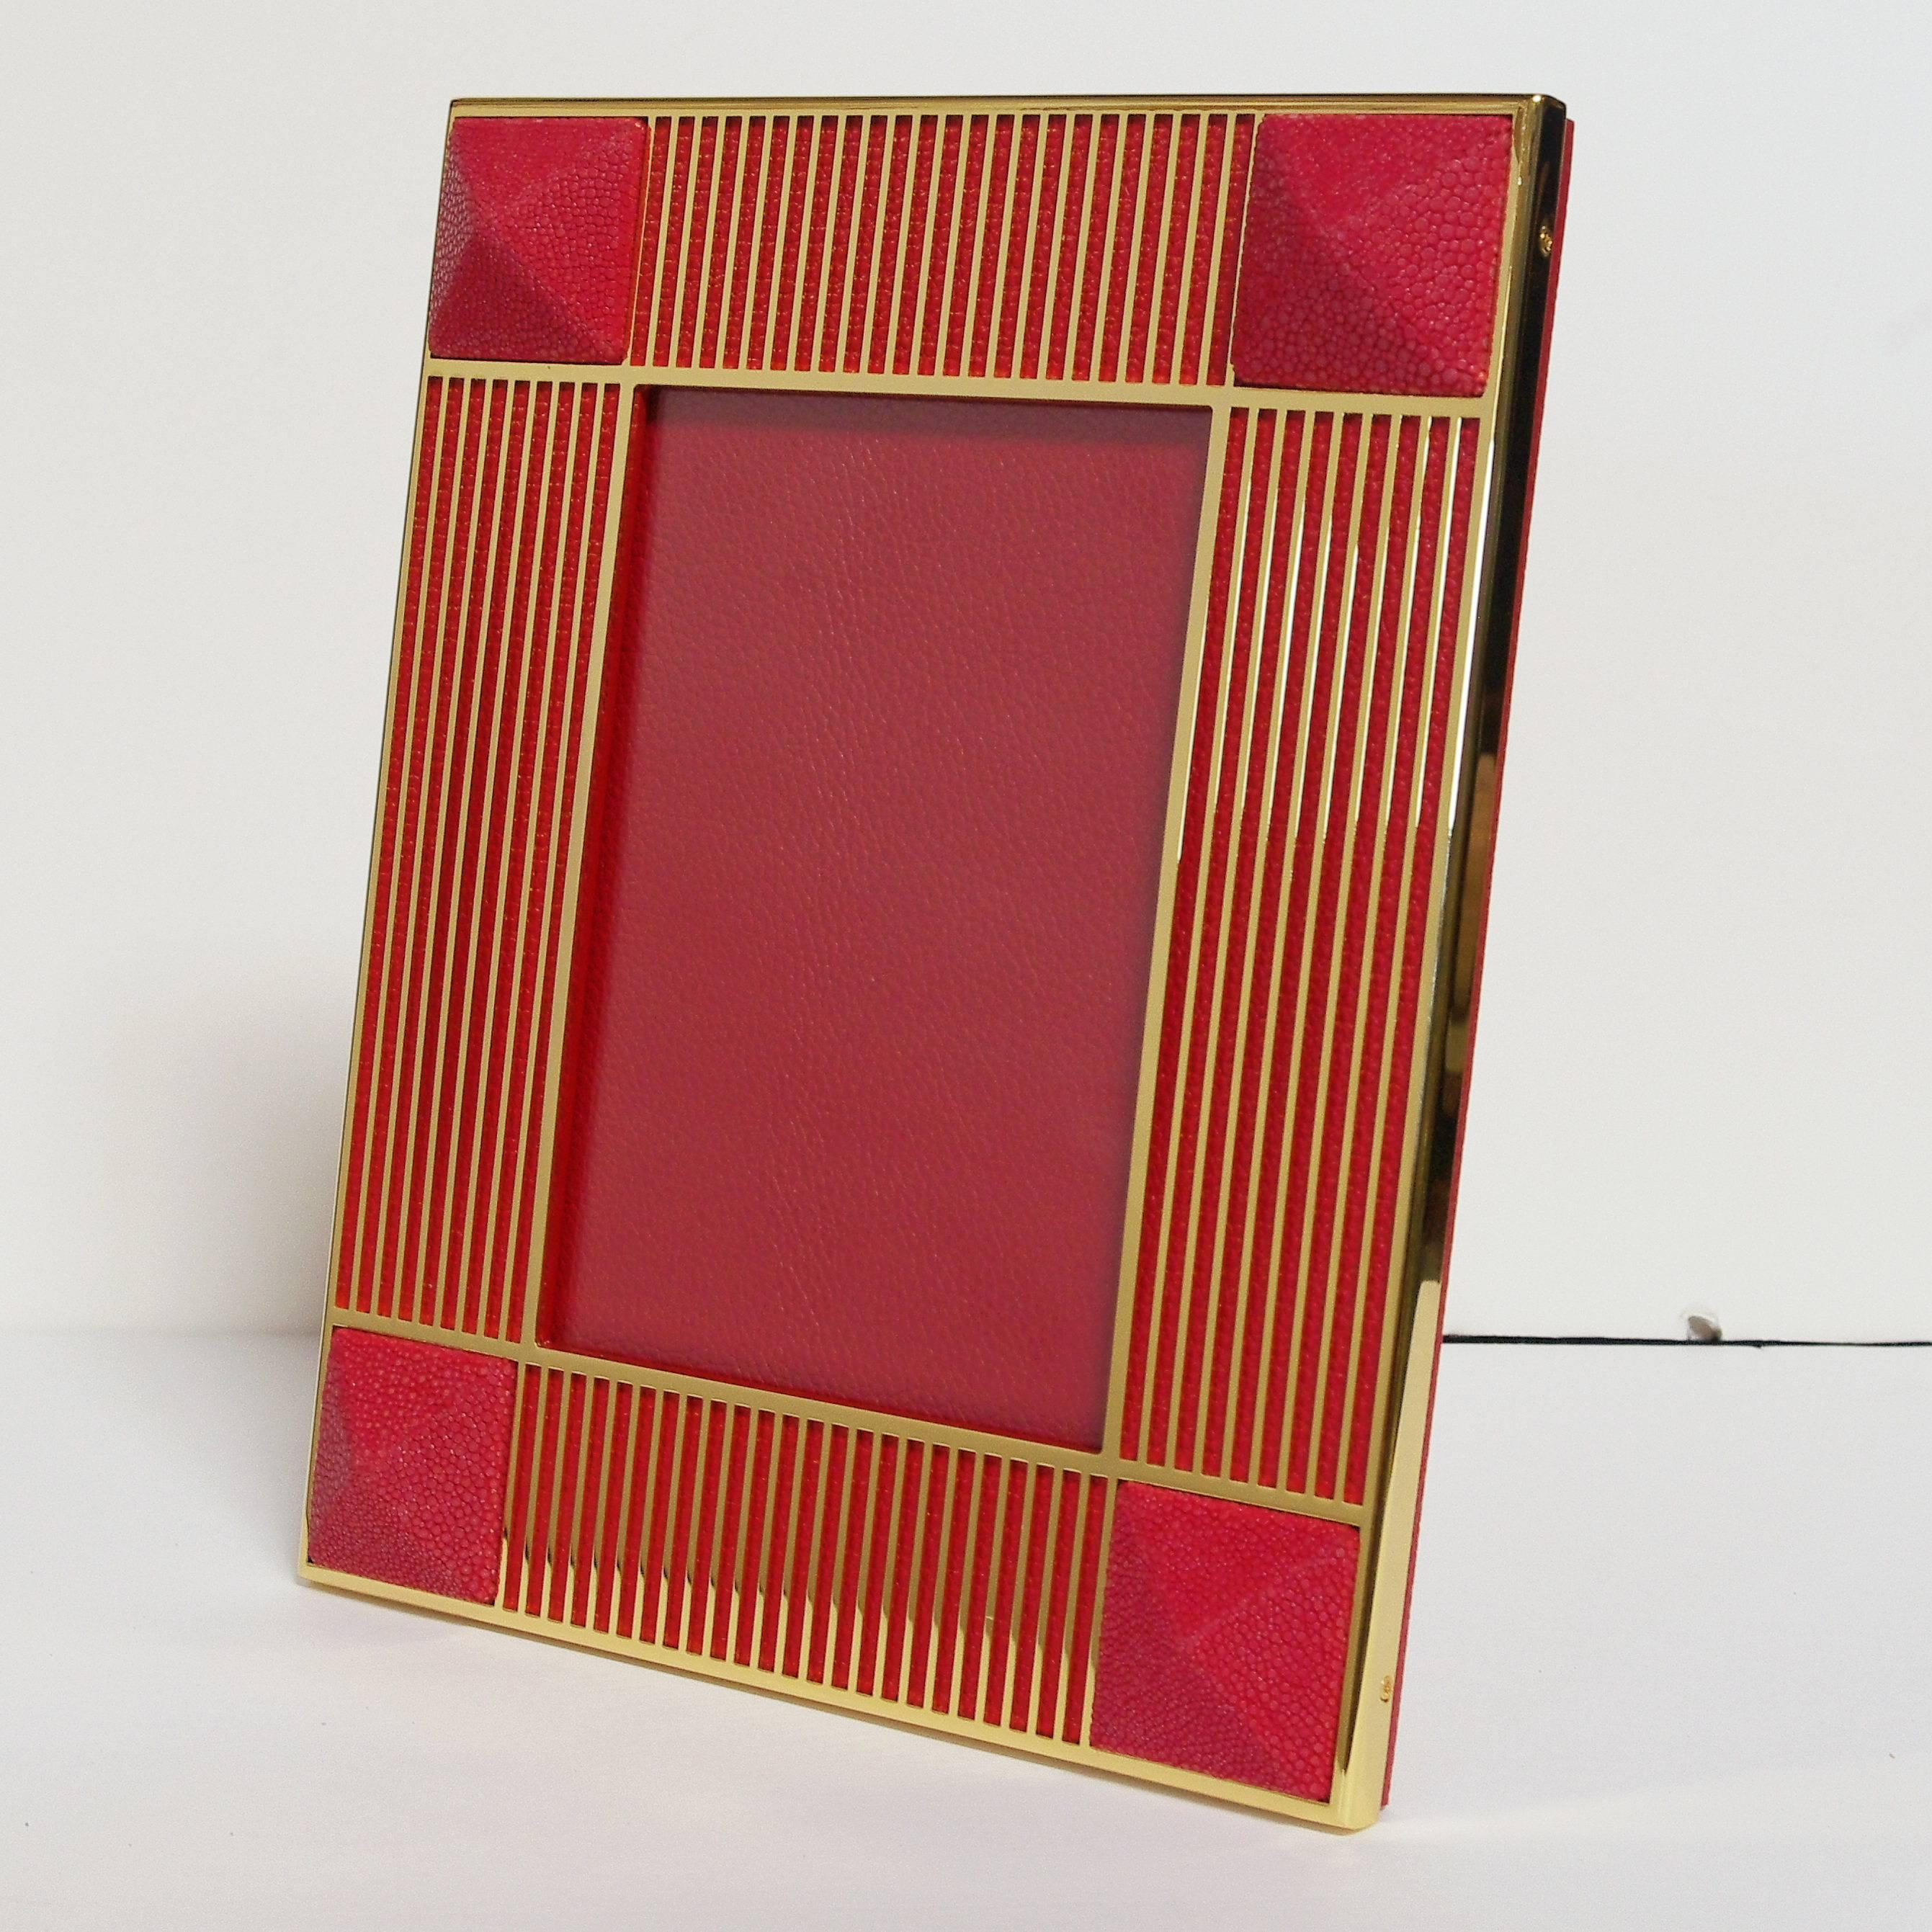 Pyramid red shagreen gold-plated photo frame by Fabio Ltdi
For photo size 5" x 7".
Comes in a red leather box